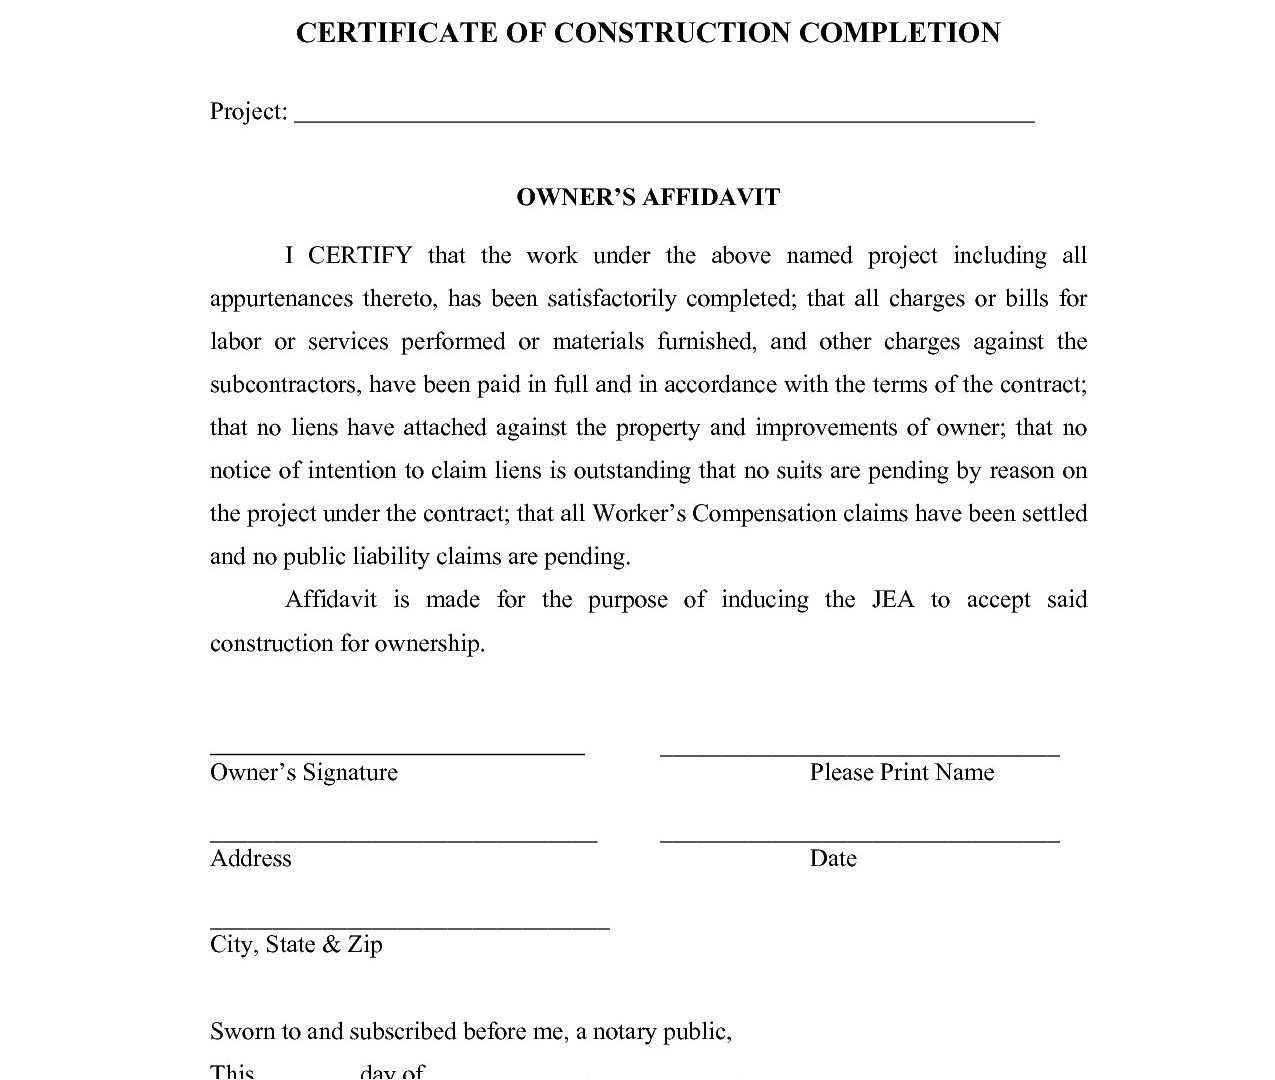 Work Completion Certificate Template – Dalep.midnightpig.co Within Certificate Of Completion Construction Templates